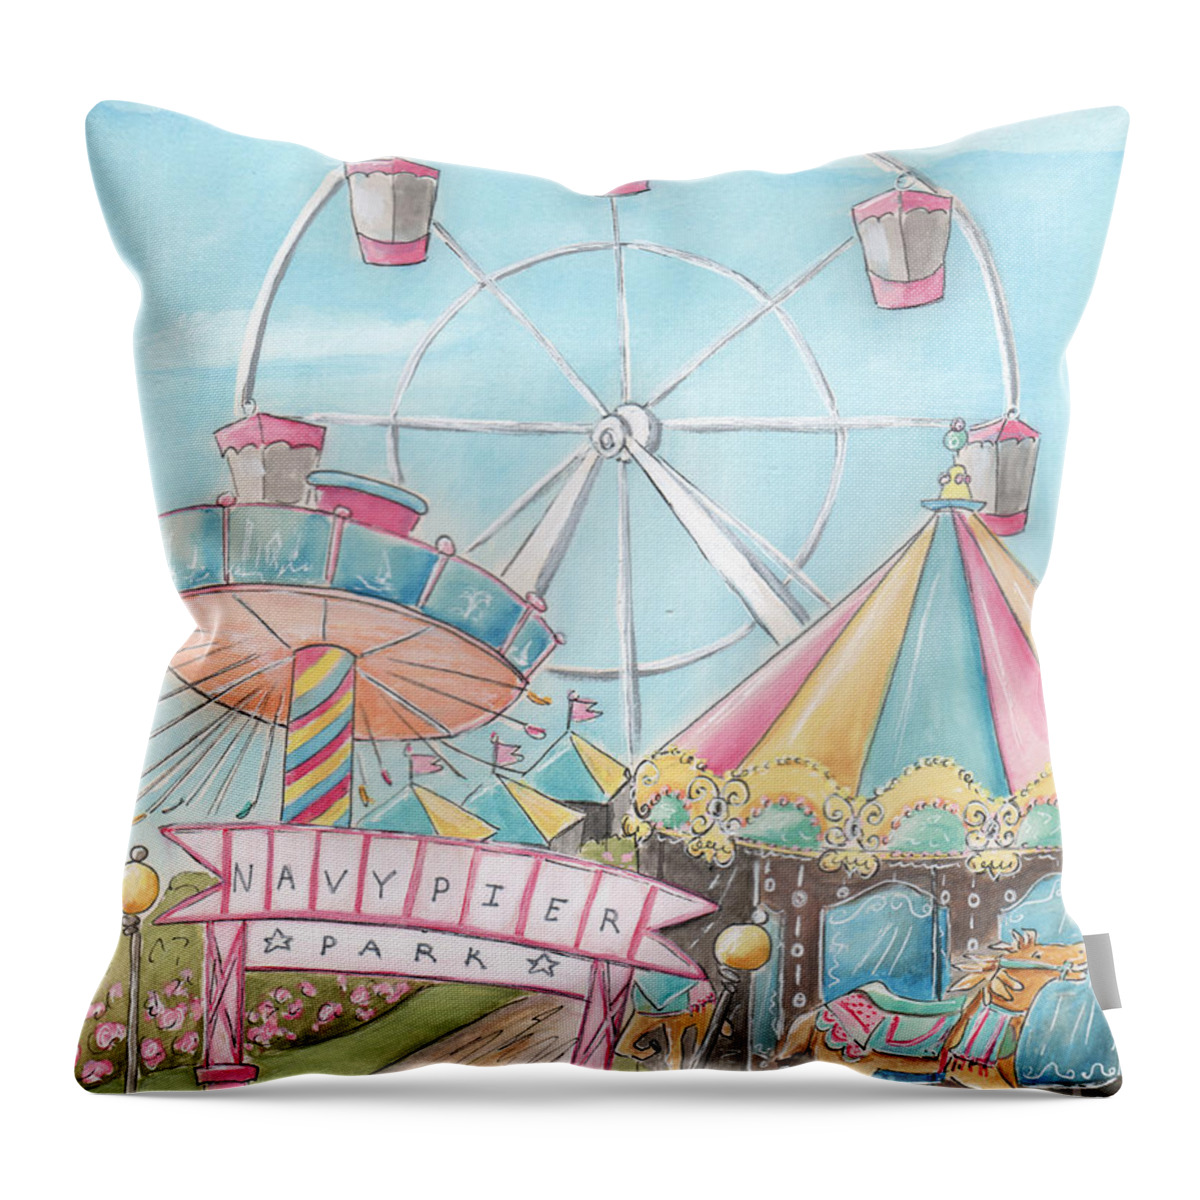 Chicago Print Throw Pillow featuring the painting Chicago Girl Navy Pier by Debbie Cerone